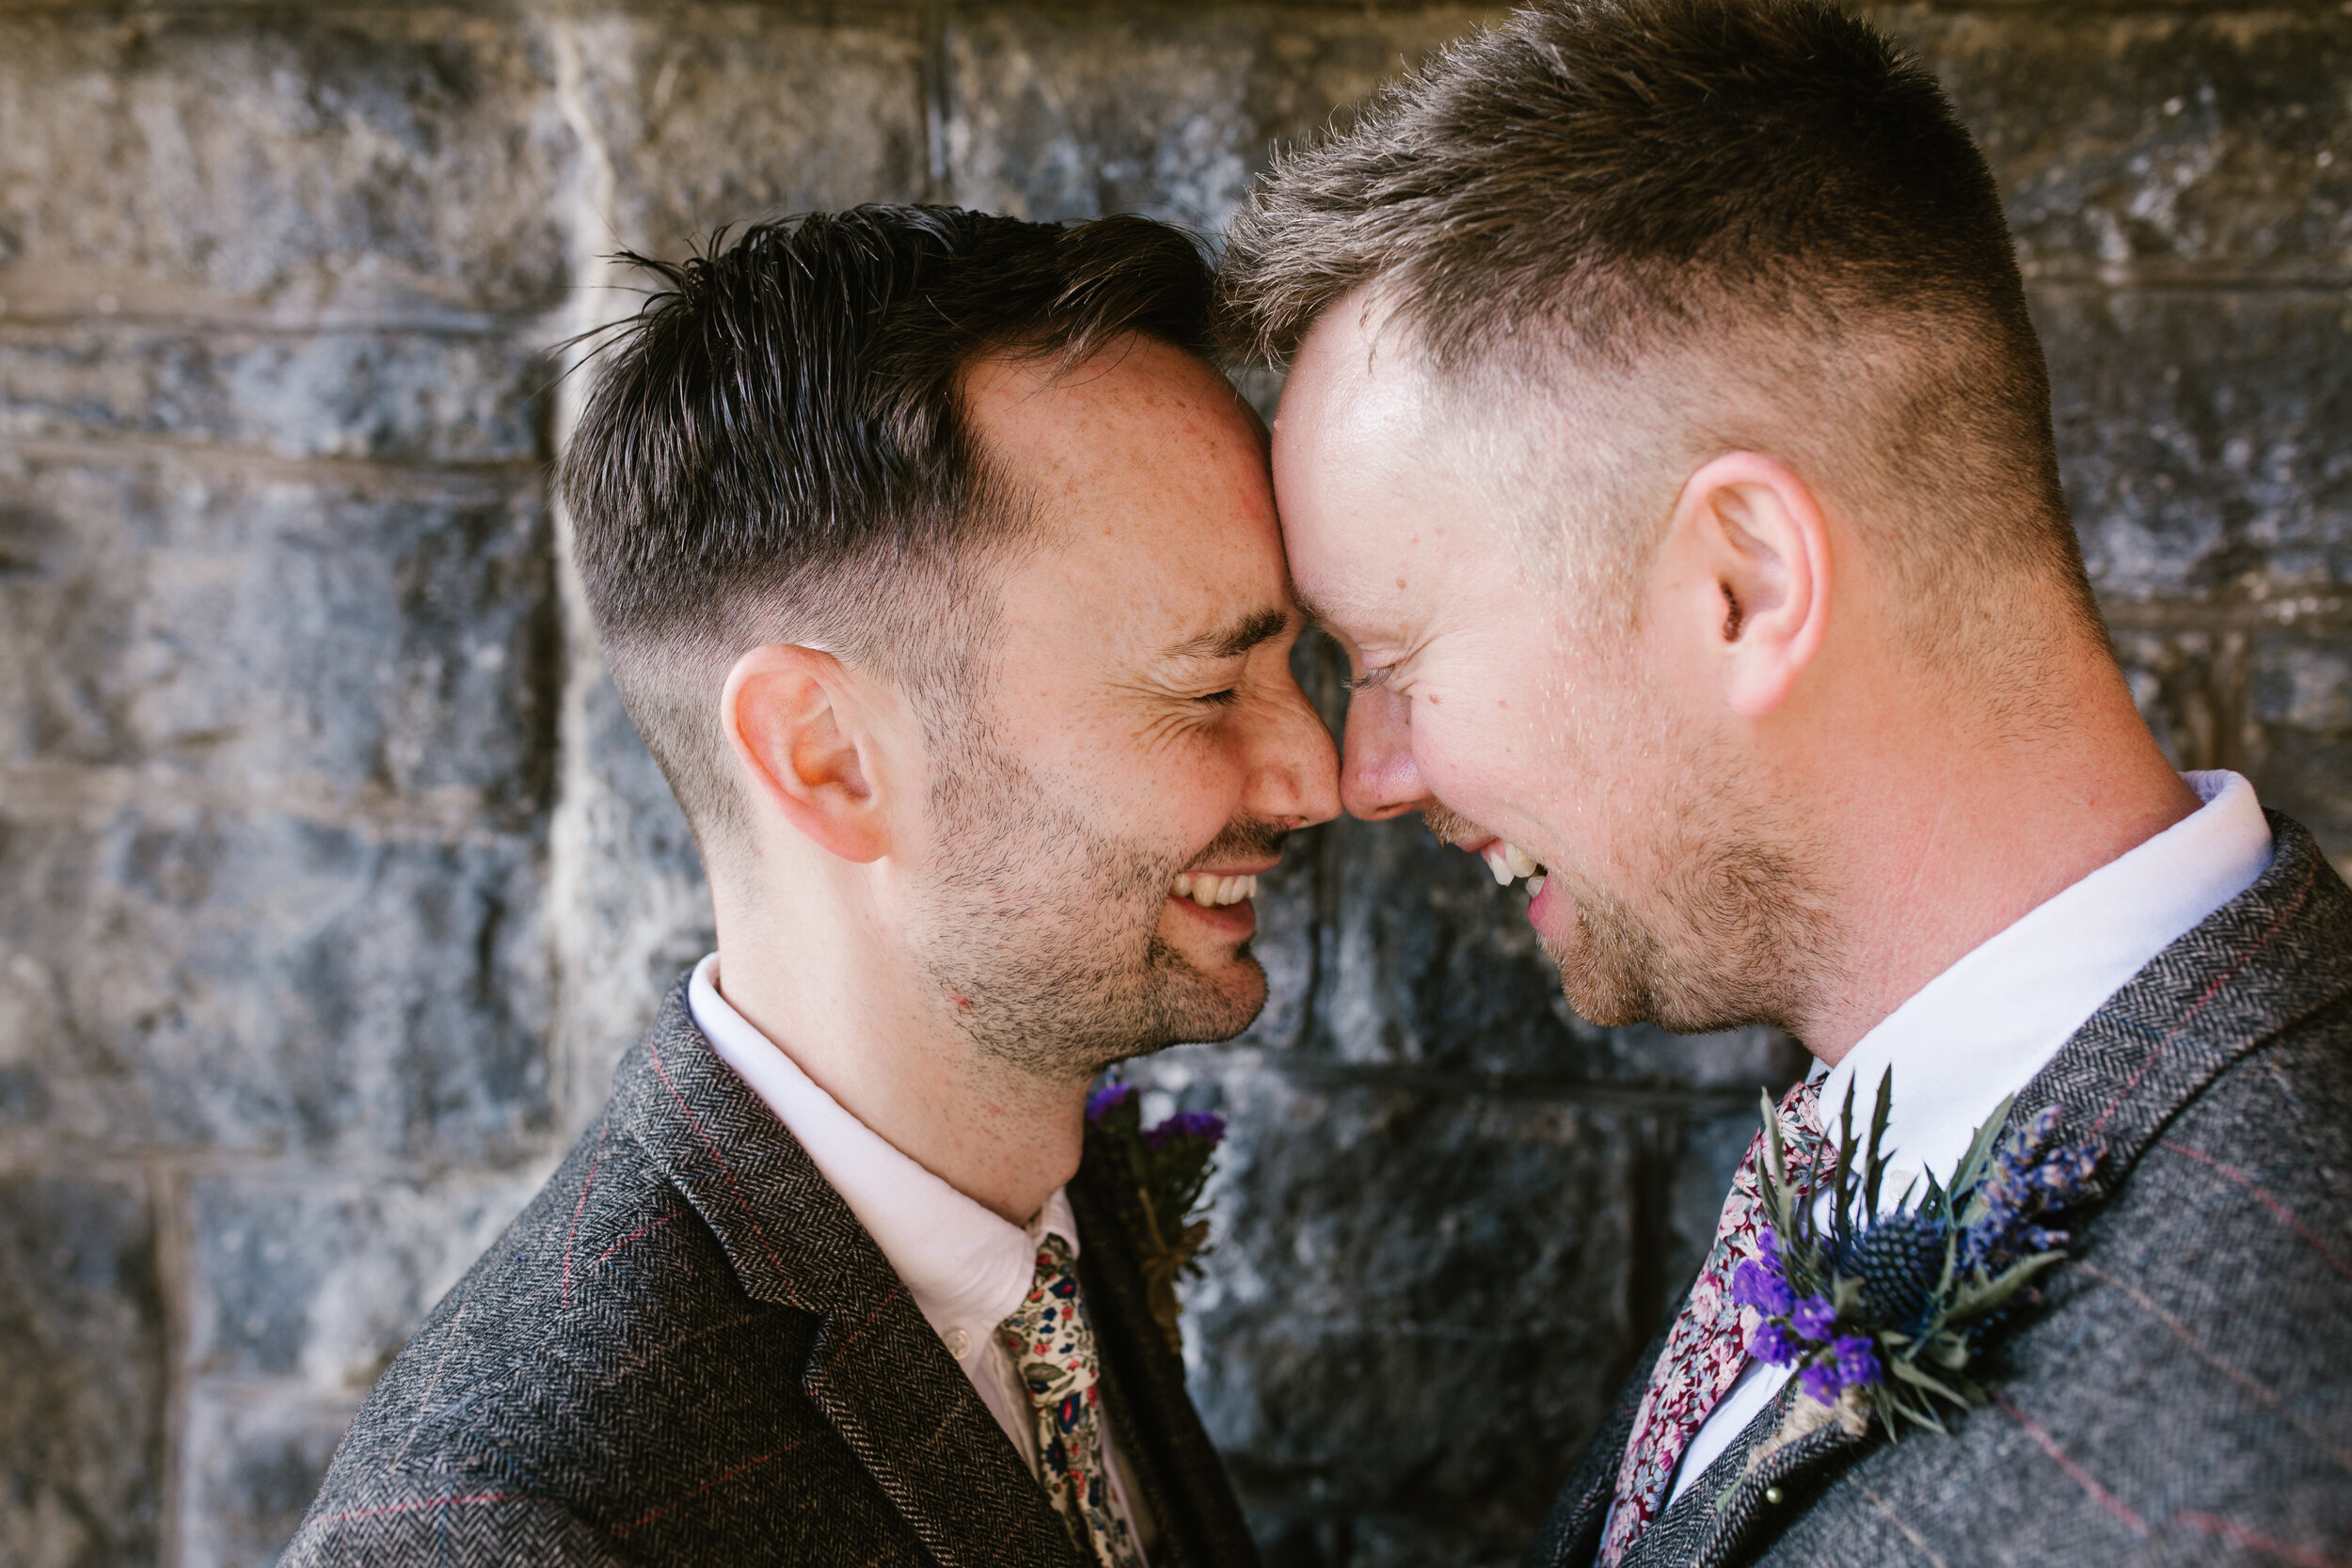 an intimate up close photo of two grooms smiling together with their faces touching